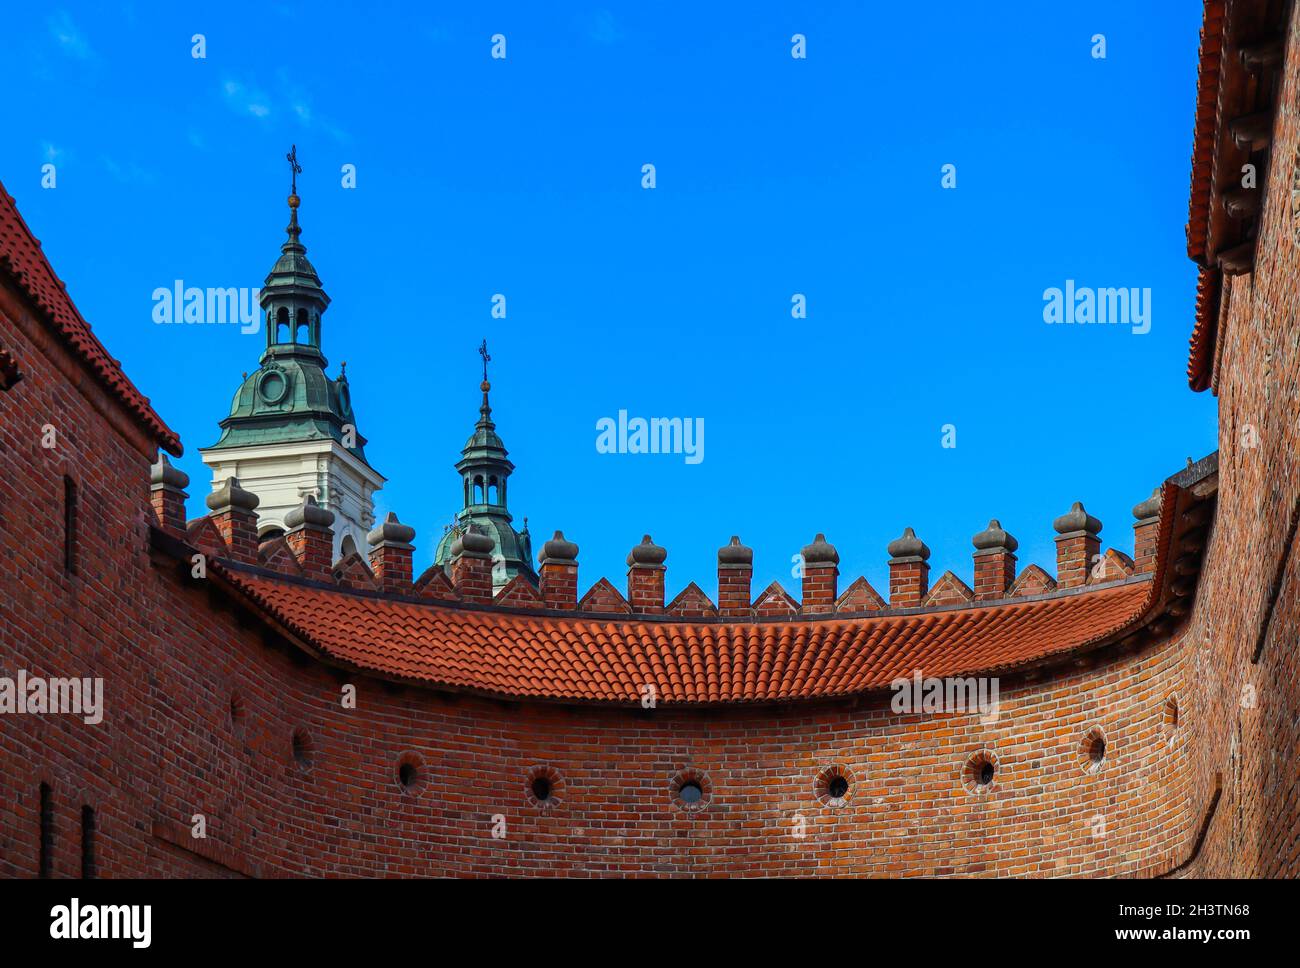 Two towers with spiers and red brick walls of Warsaw Barbican, Poland Stock Photo